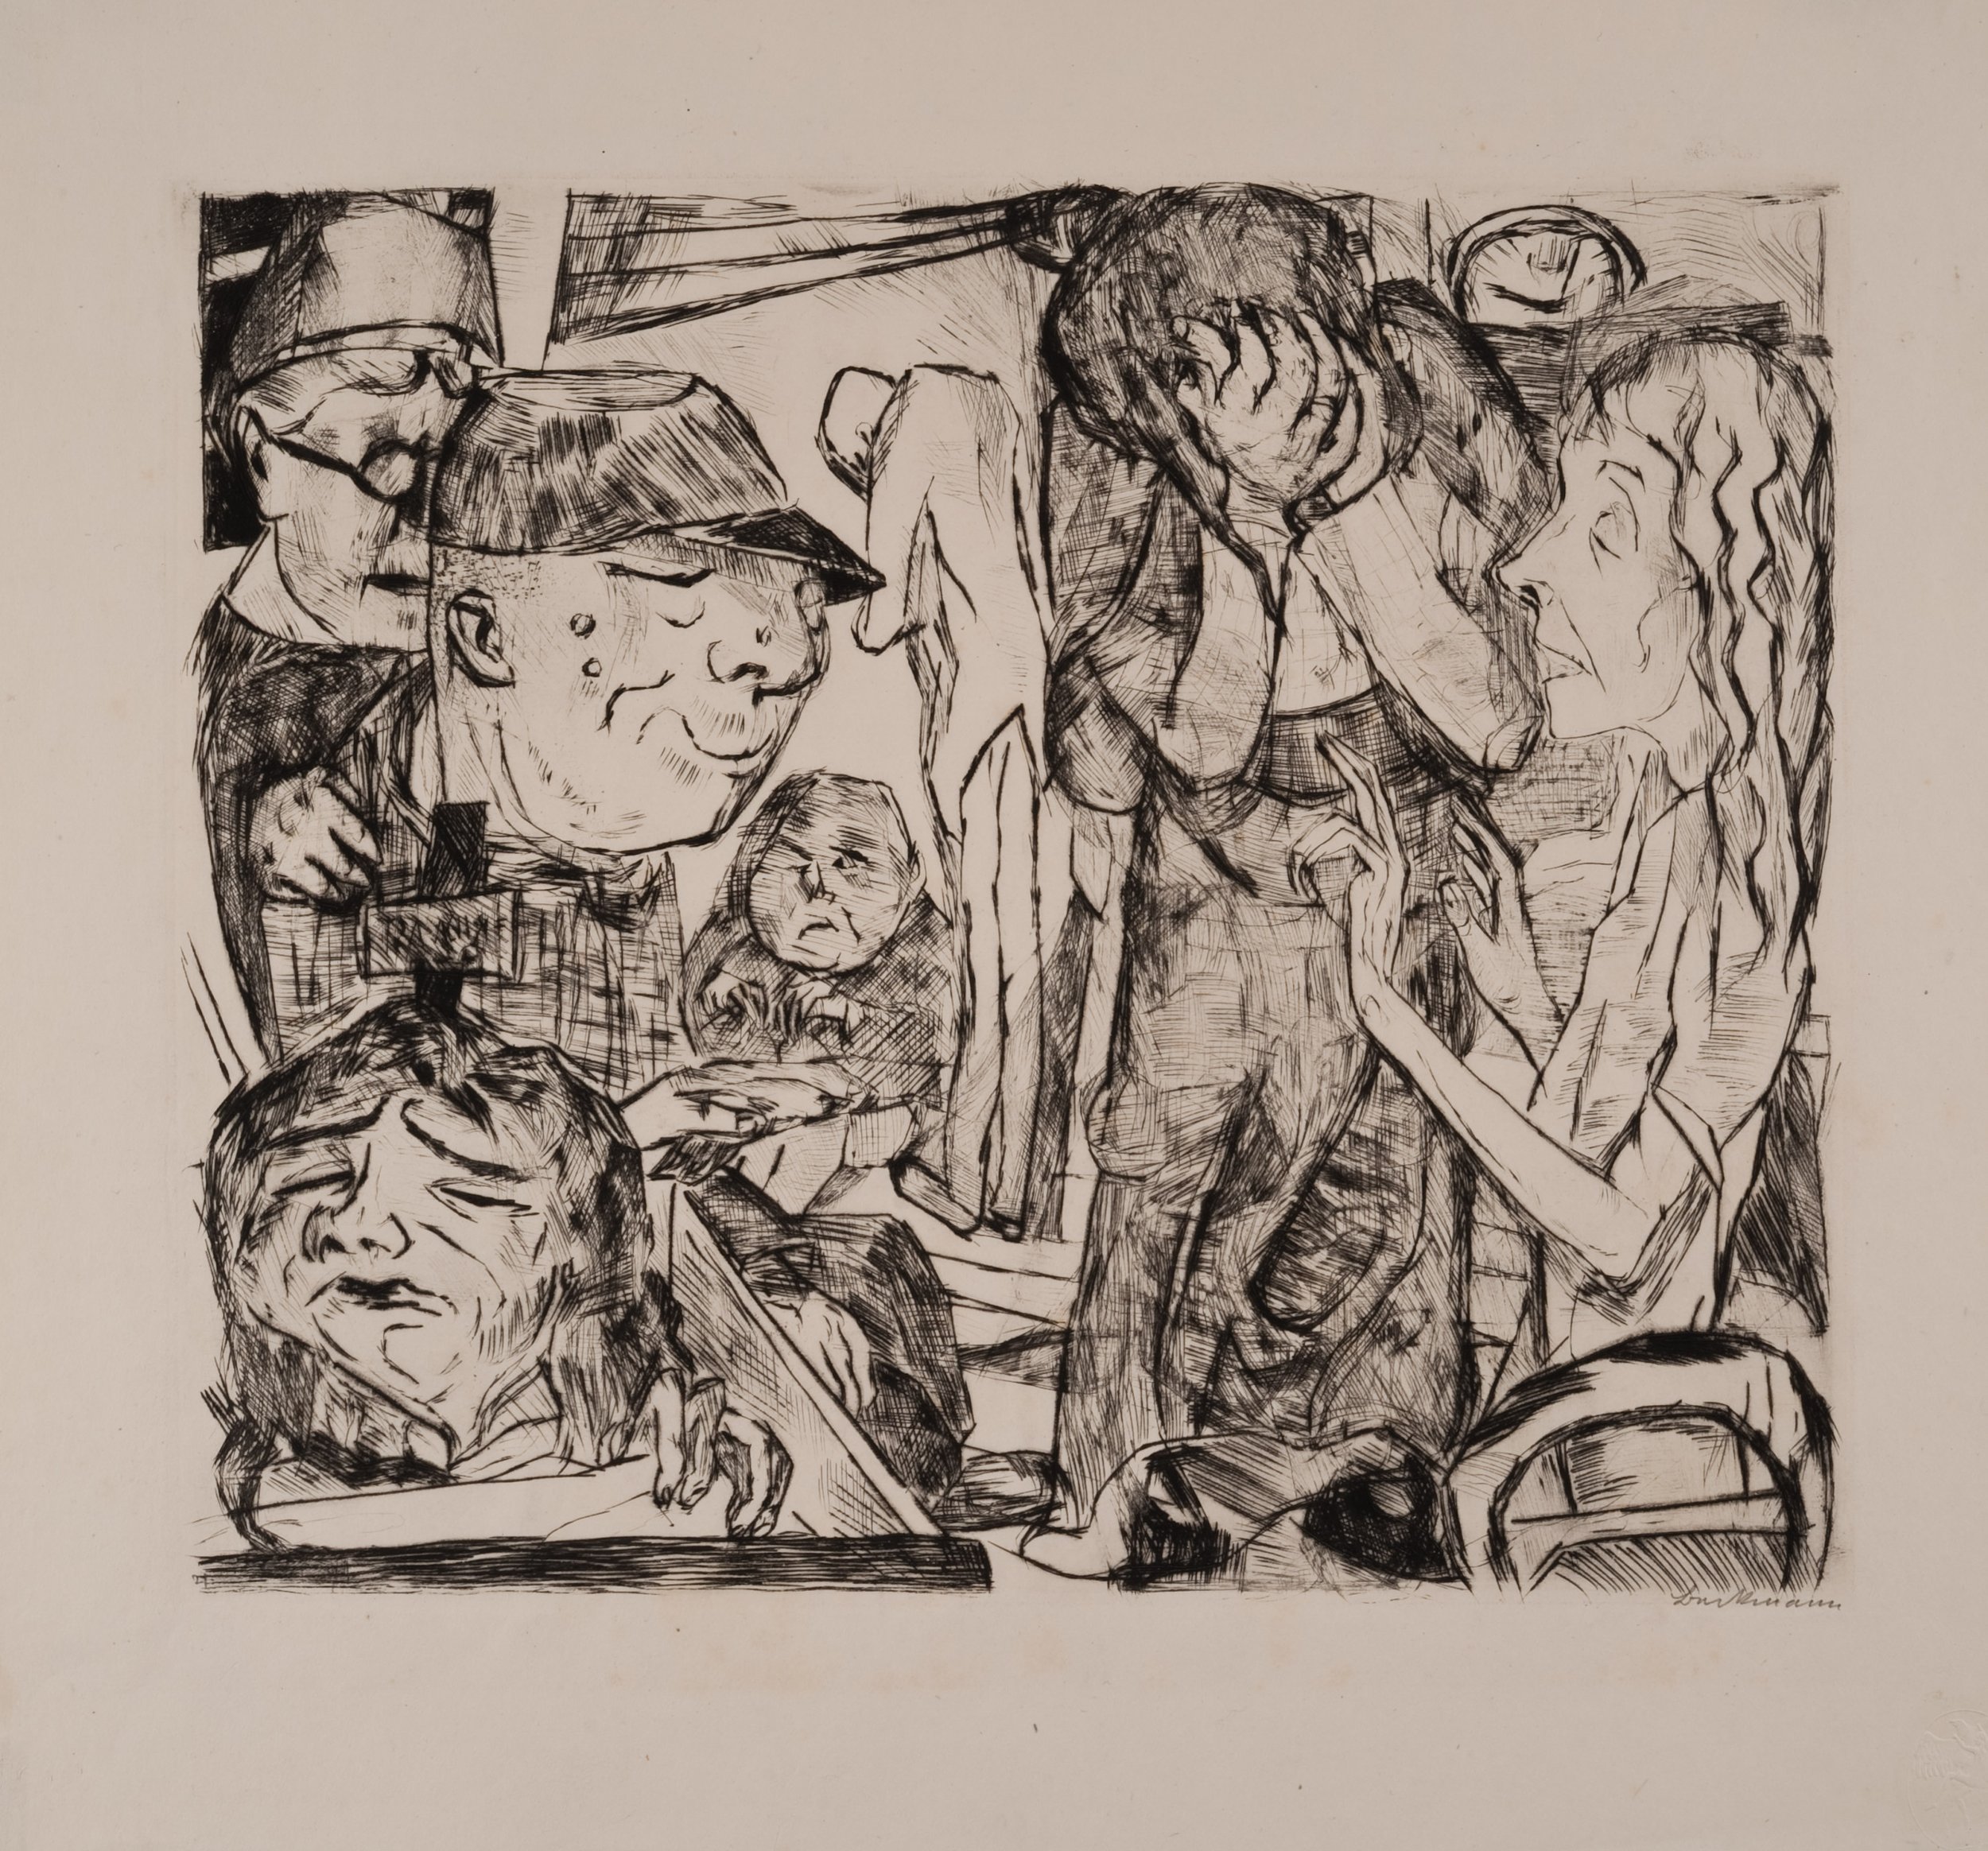   Max Beckmann  Germany, 1884–1950  Irrenhaus (Madhouse) , 1918 drypoint etching on paper, 9 7/8 x 11 1/2 inches Gift of David and Eva Bradford, 2009.31.4 